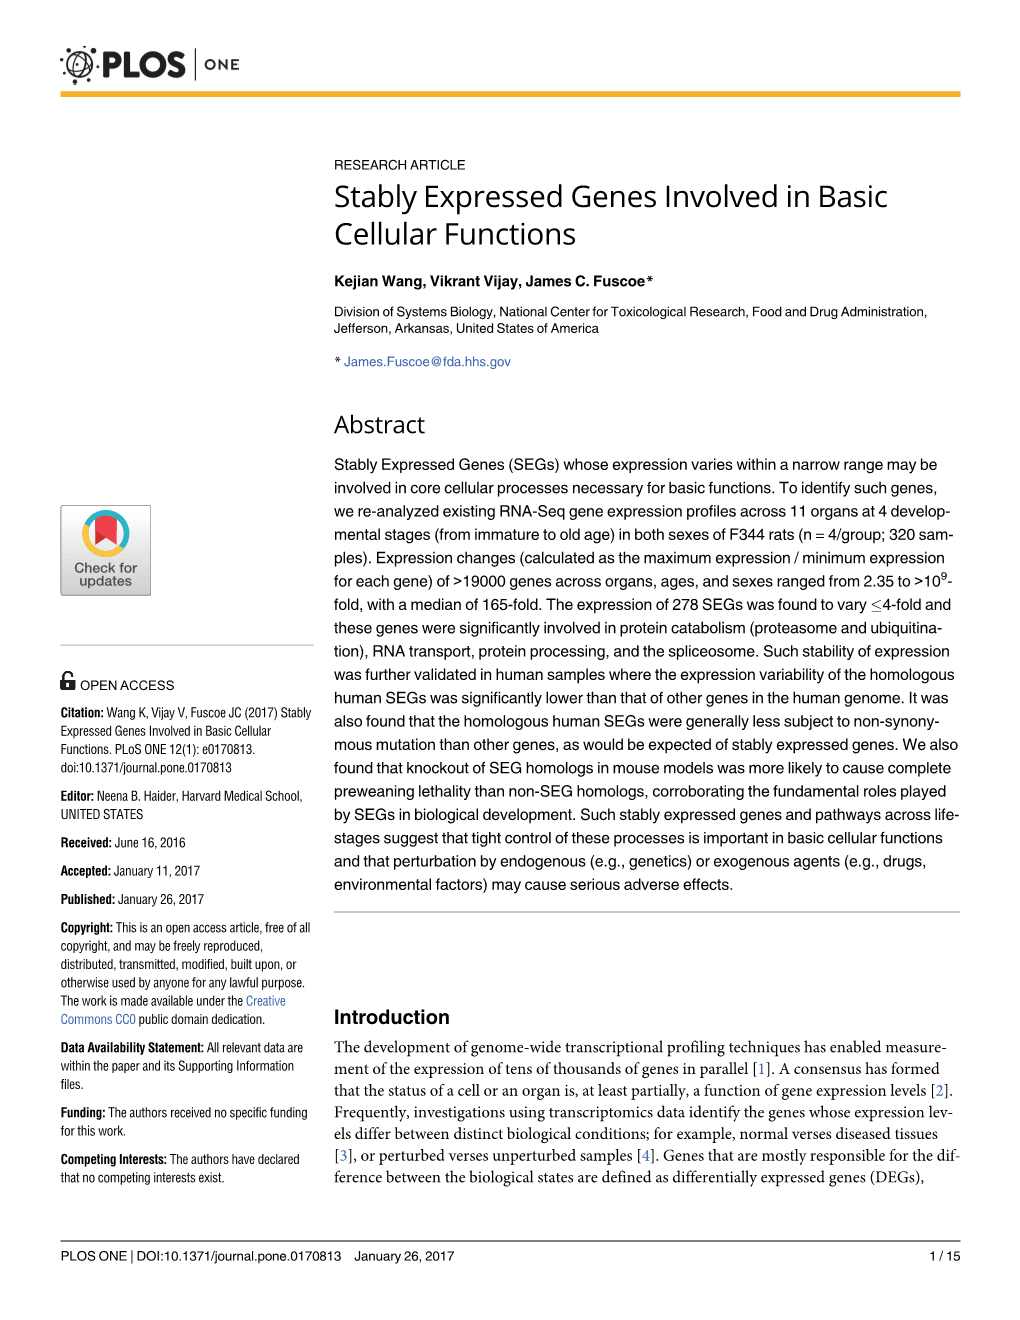 Stably Expressed Genes Involved in Basic Cellular Functions